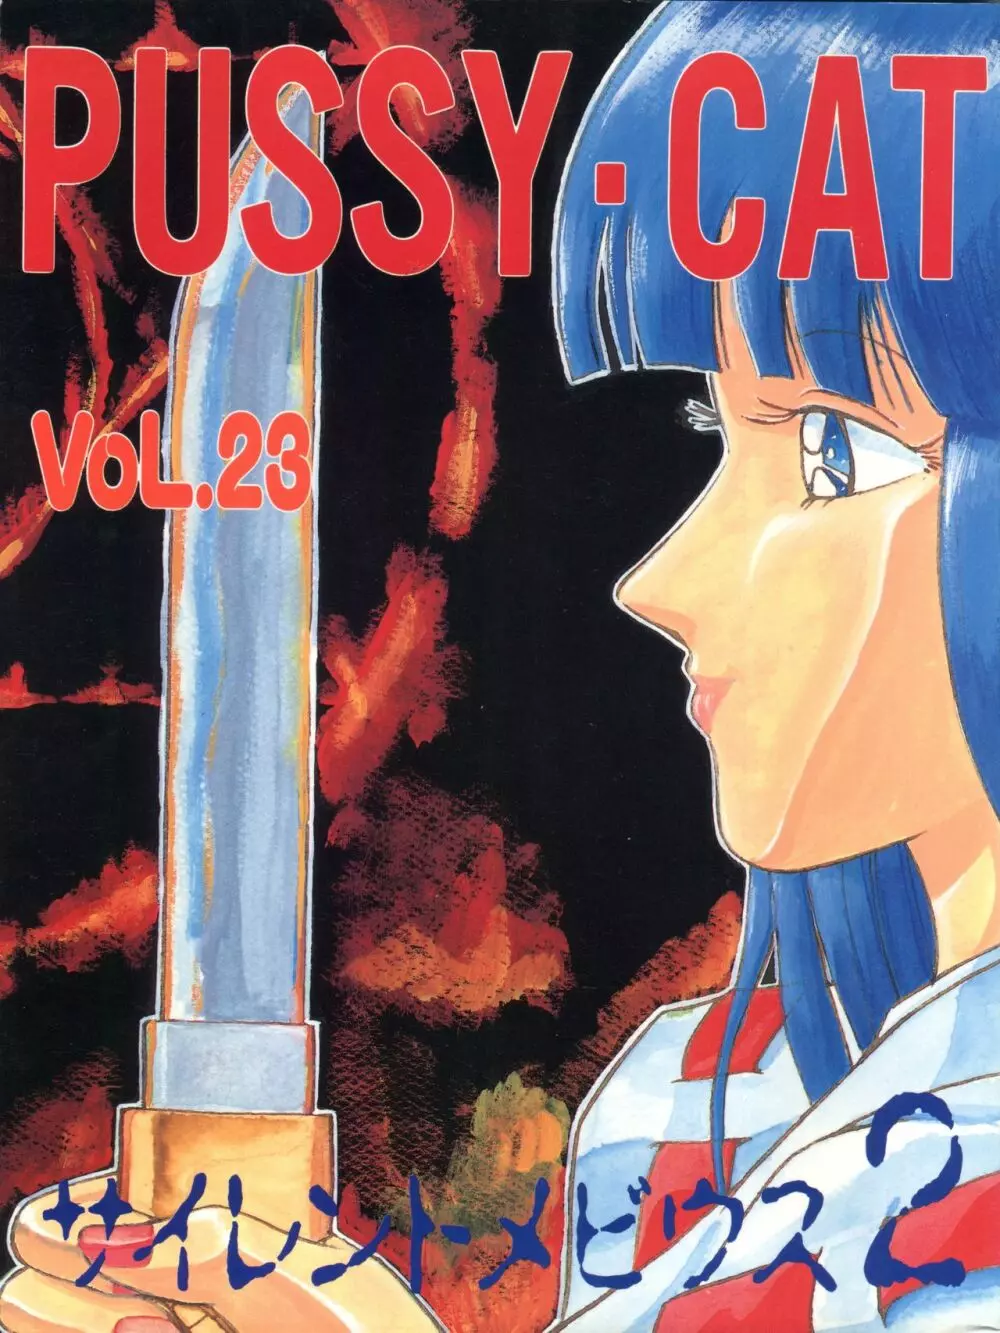 PUSSY・CAT VOL.23 サイレントメビウス2 - page1